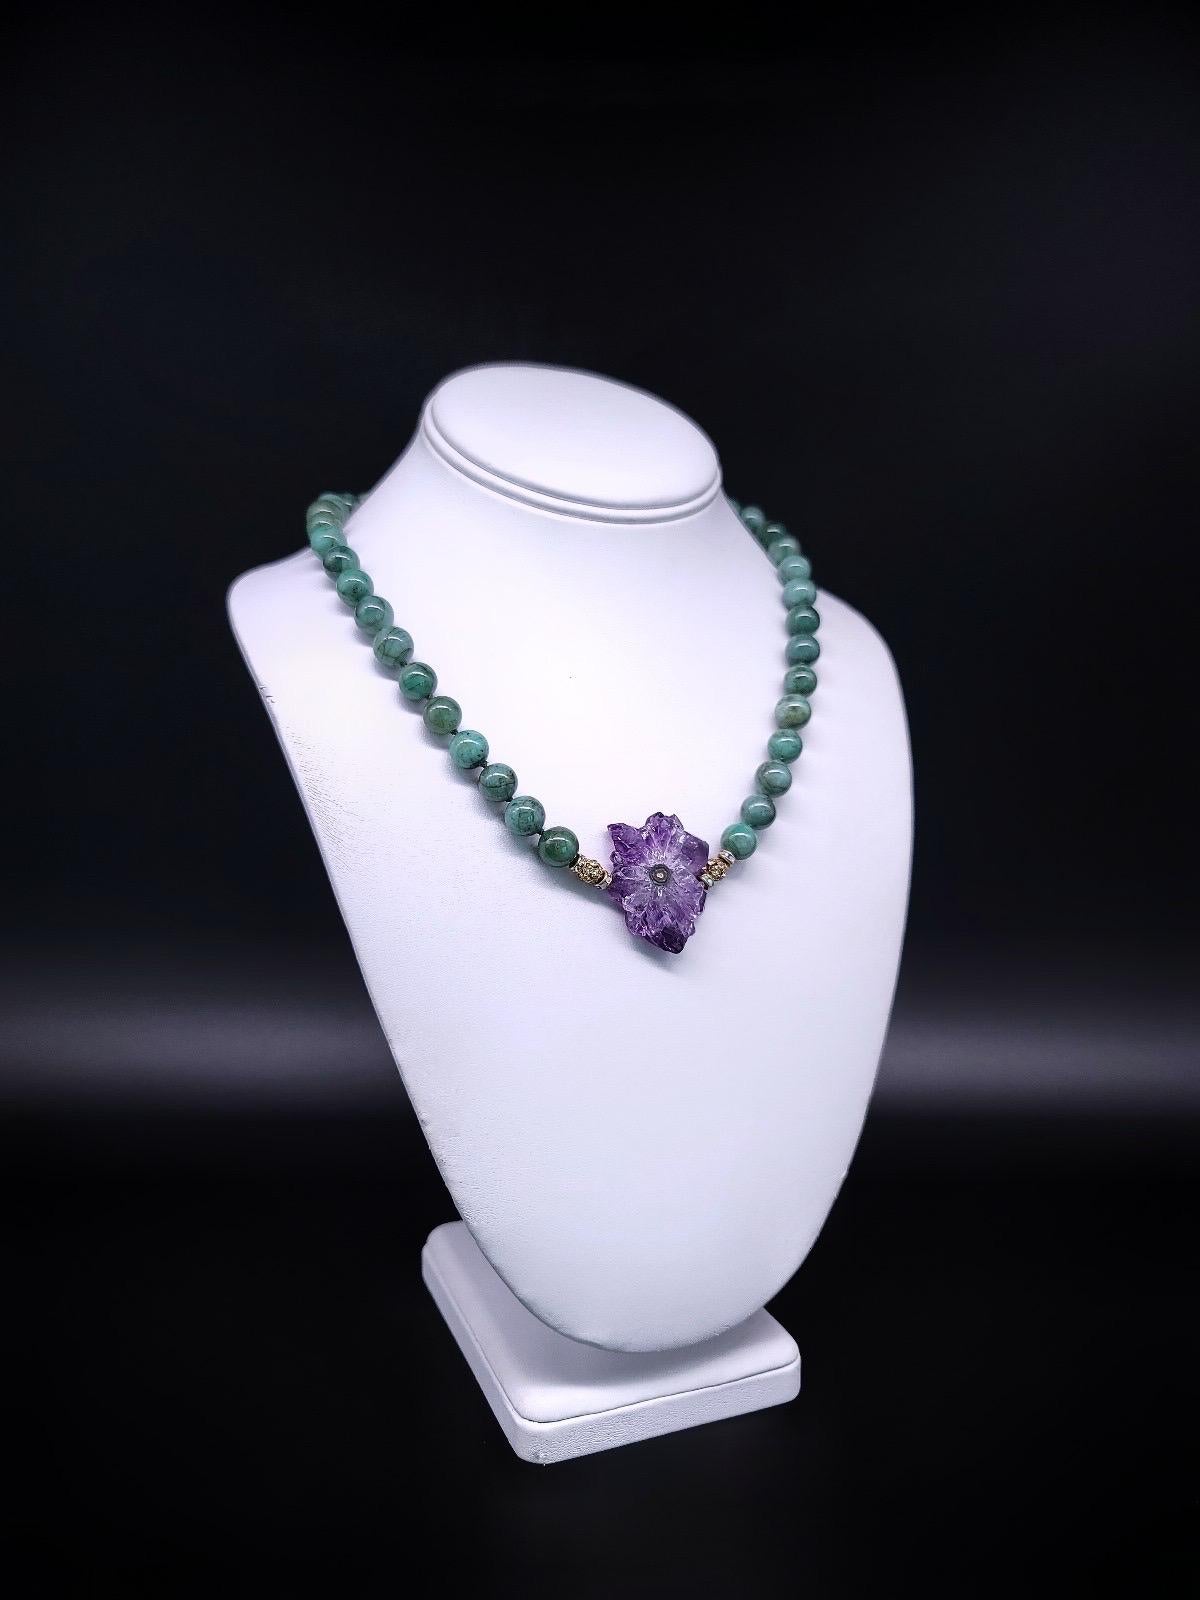 Discover the extraordinary with our one-of-a-kind necklace featuring Brazilian Emerald polished beads, a Vermeil pendant showcasing an Amethyst Stalactite sliced, and the  clasp adorned with Charoite set in Vermeil. Meticulously hand-knotted with